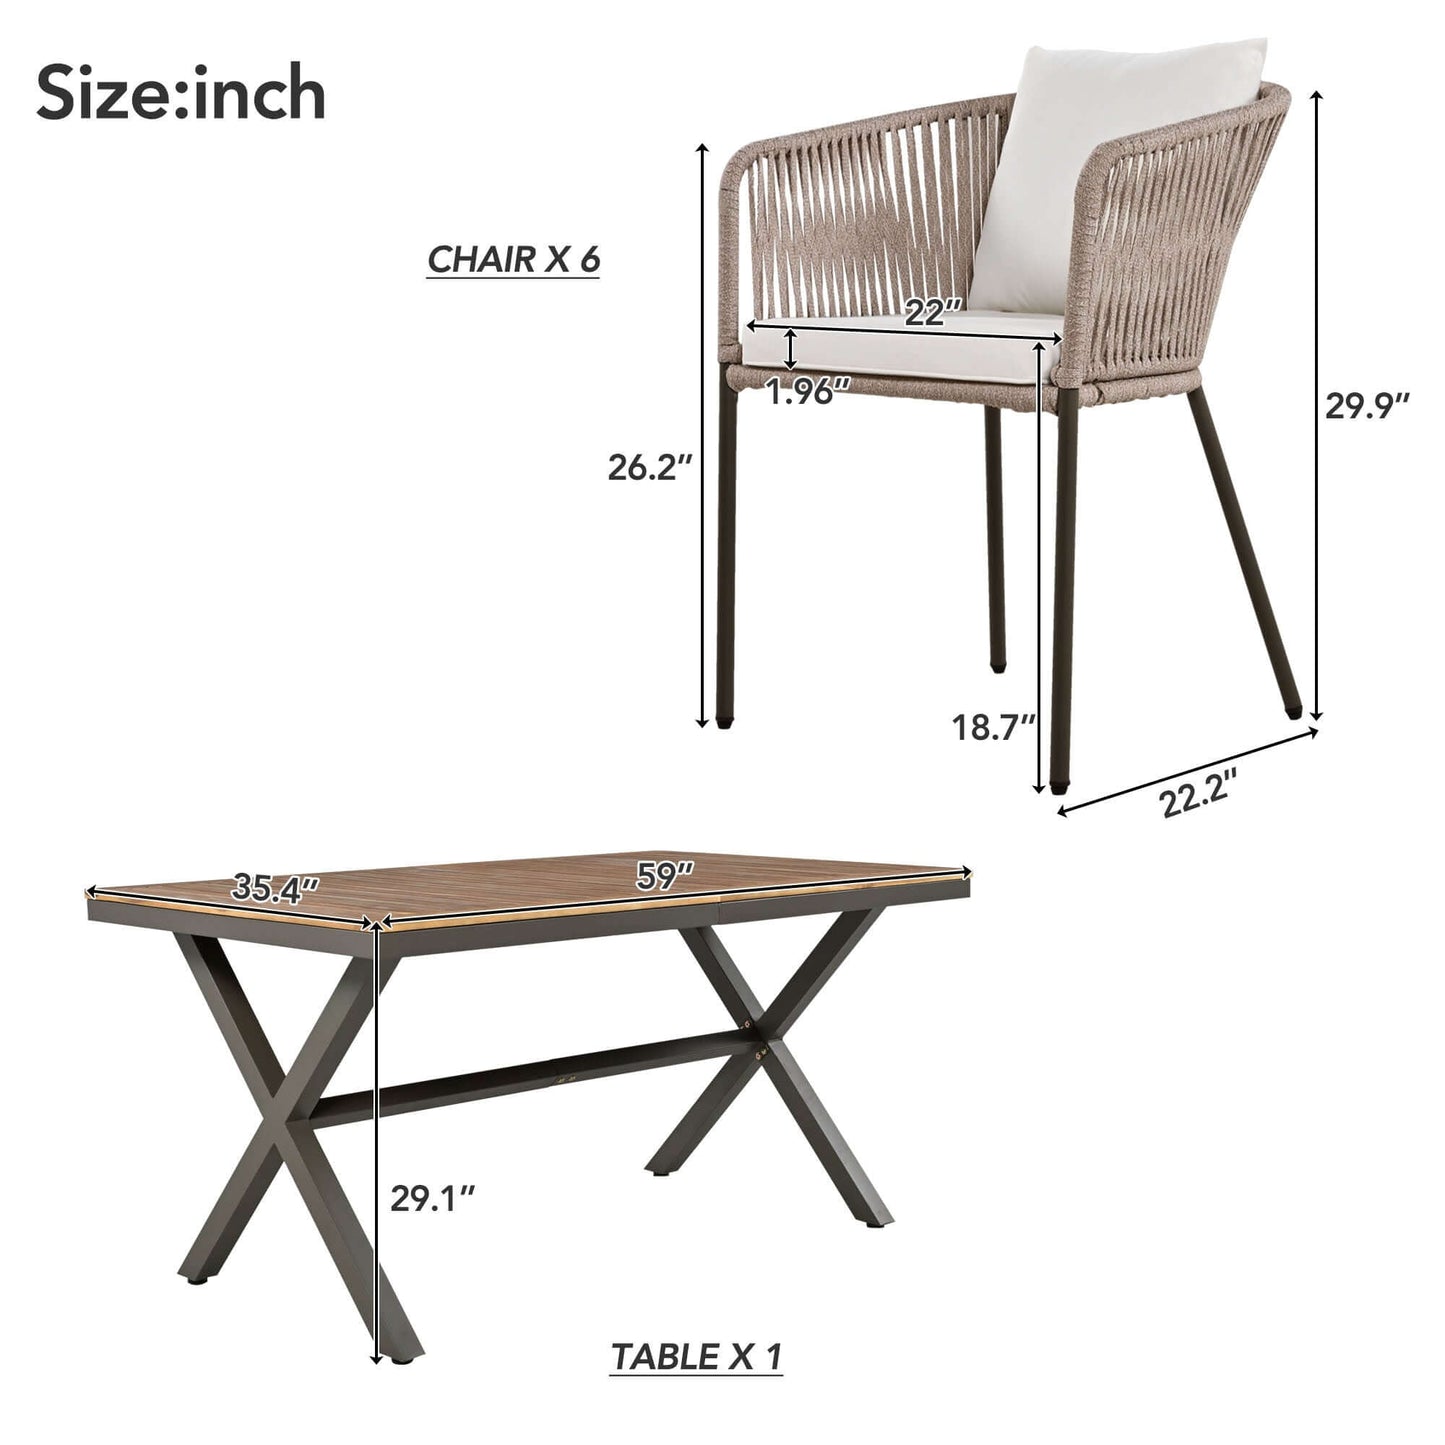 Dimensions of GO 7 Pieces Patio Dining Set including dining table and chairs with measurements in inches.